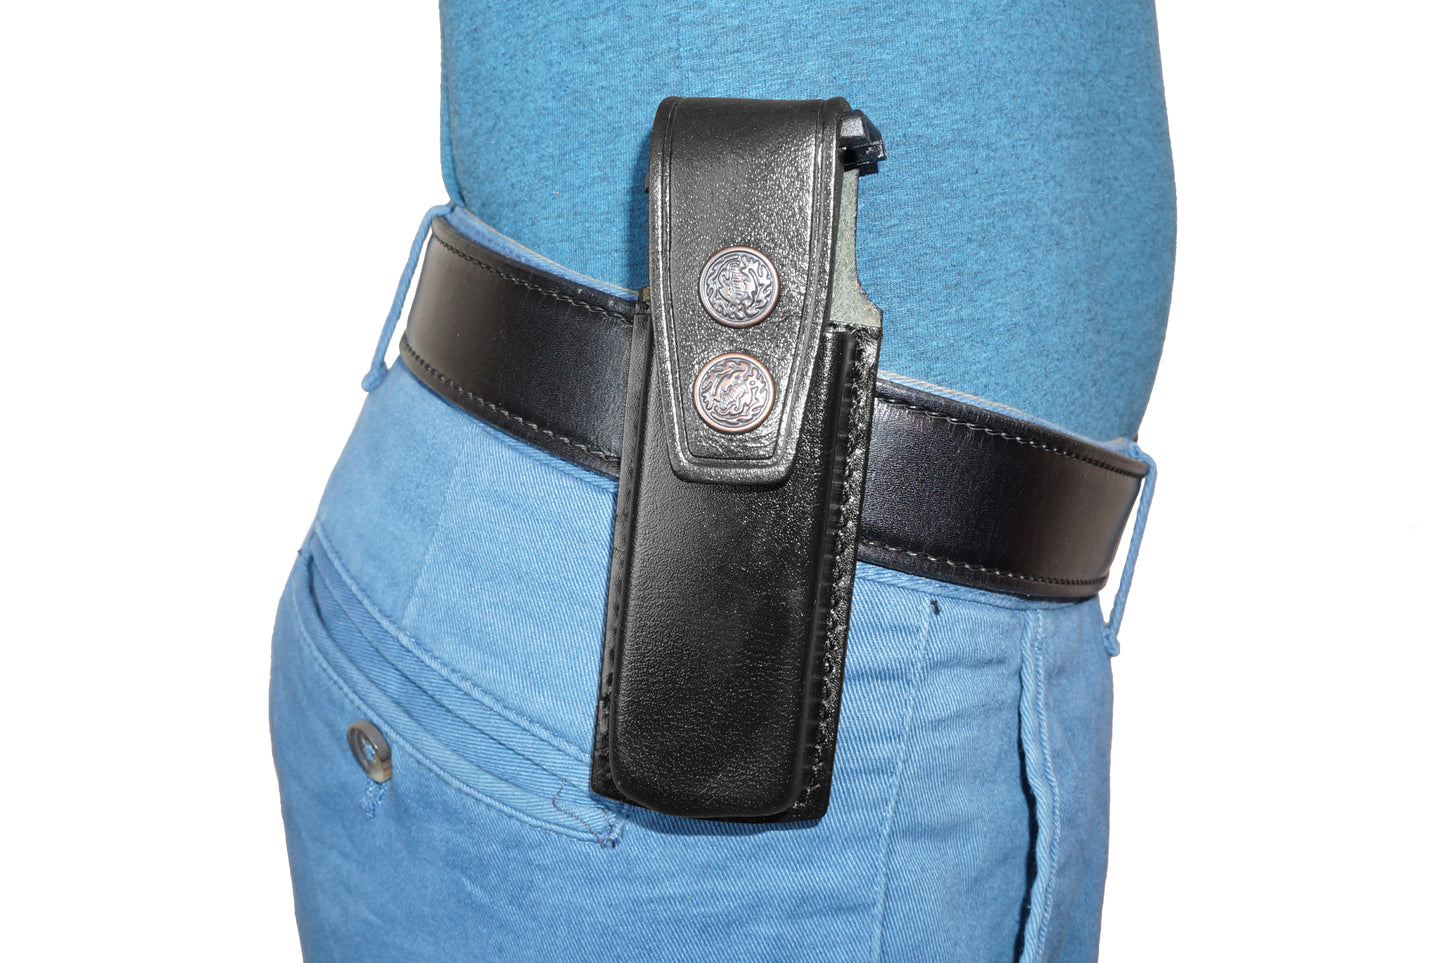 Holster ALIS9092 Leather Single & Double Magazine Pouch for Glock 17 19 22 23 Handmade!